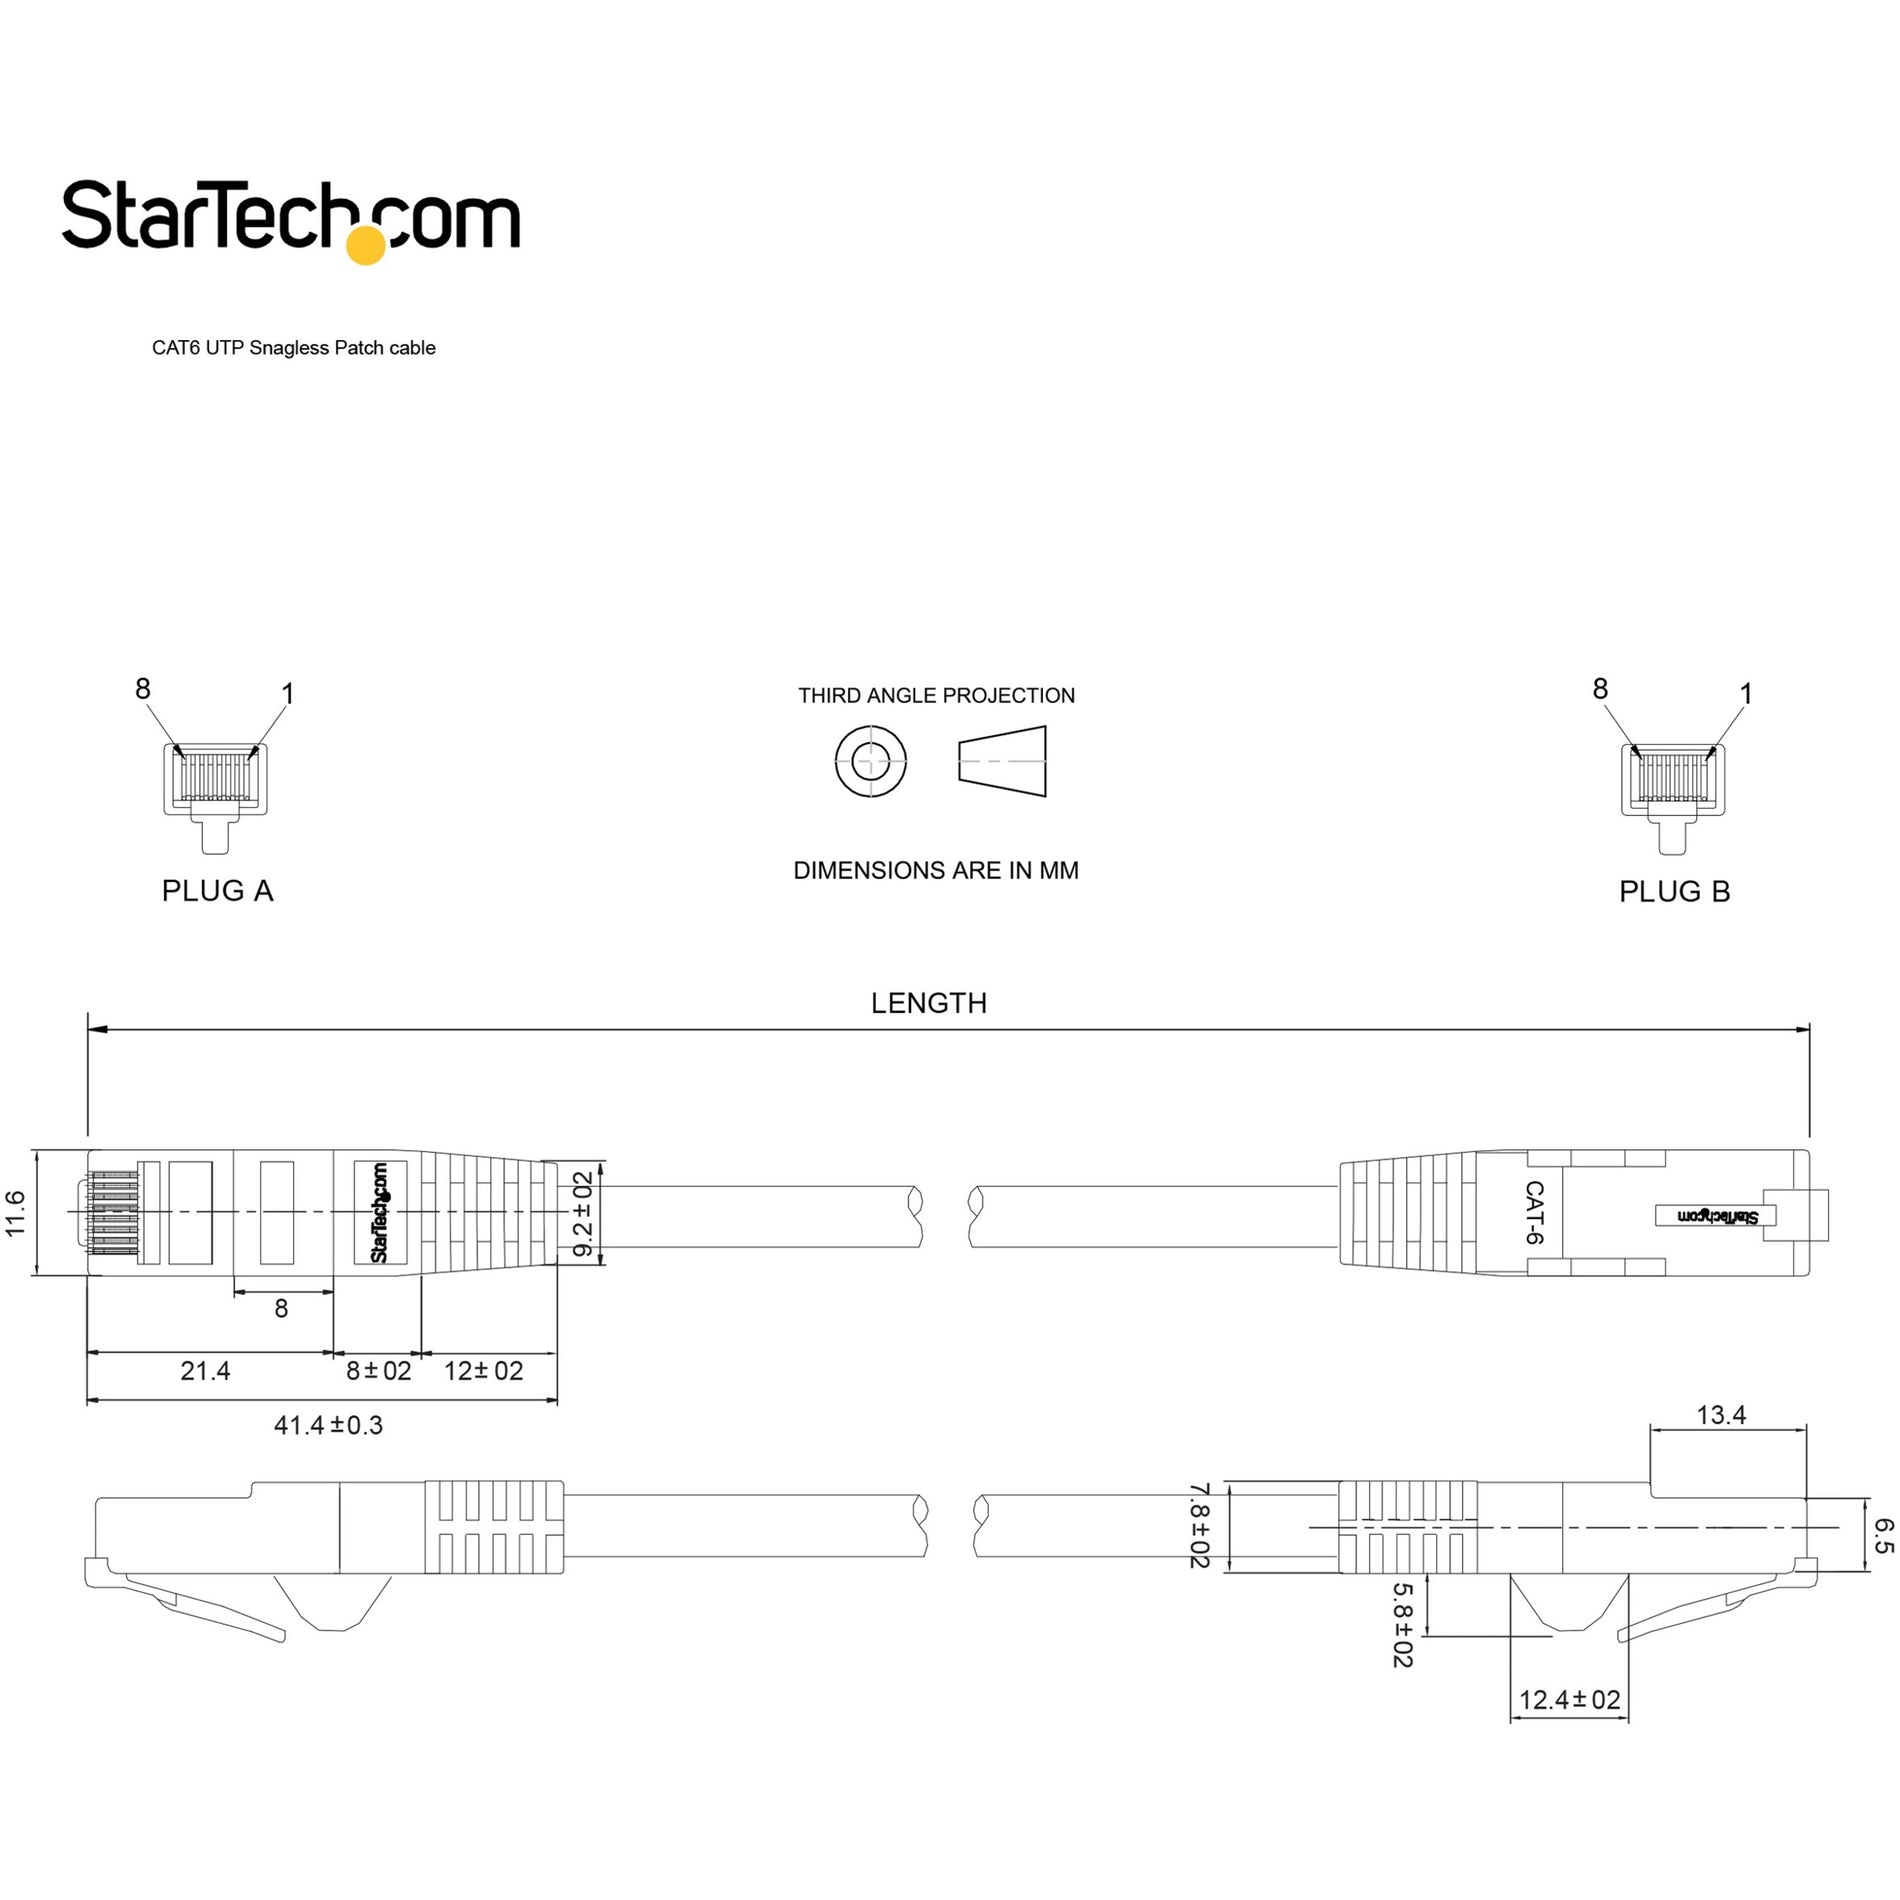 StarTech.com N6PATCH100BK 100 ft Black Snagless Cat6 UTP Patch Cable, PoE, 10 Gbit/s Data Transfer Rate